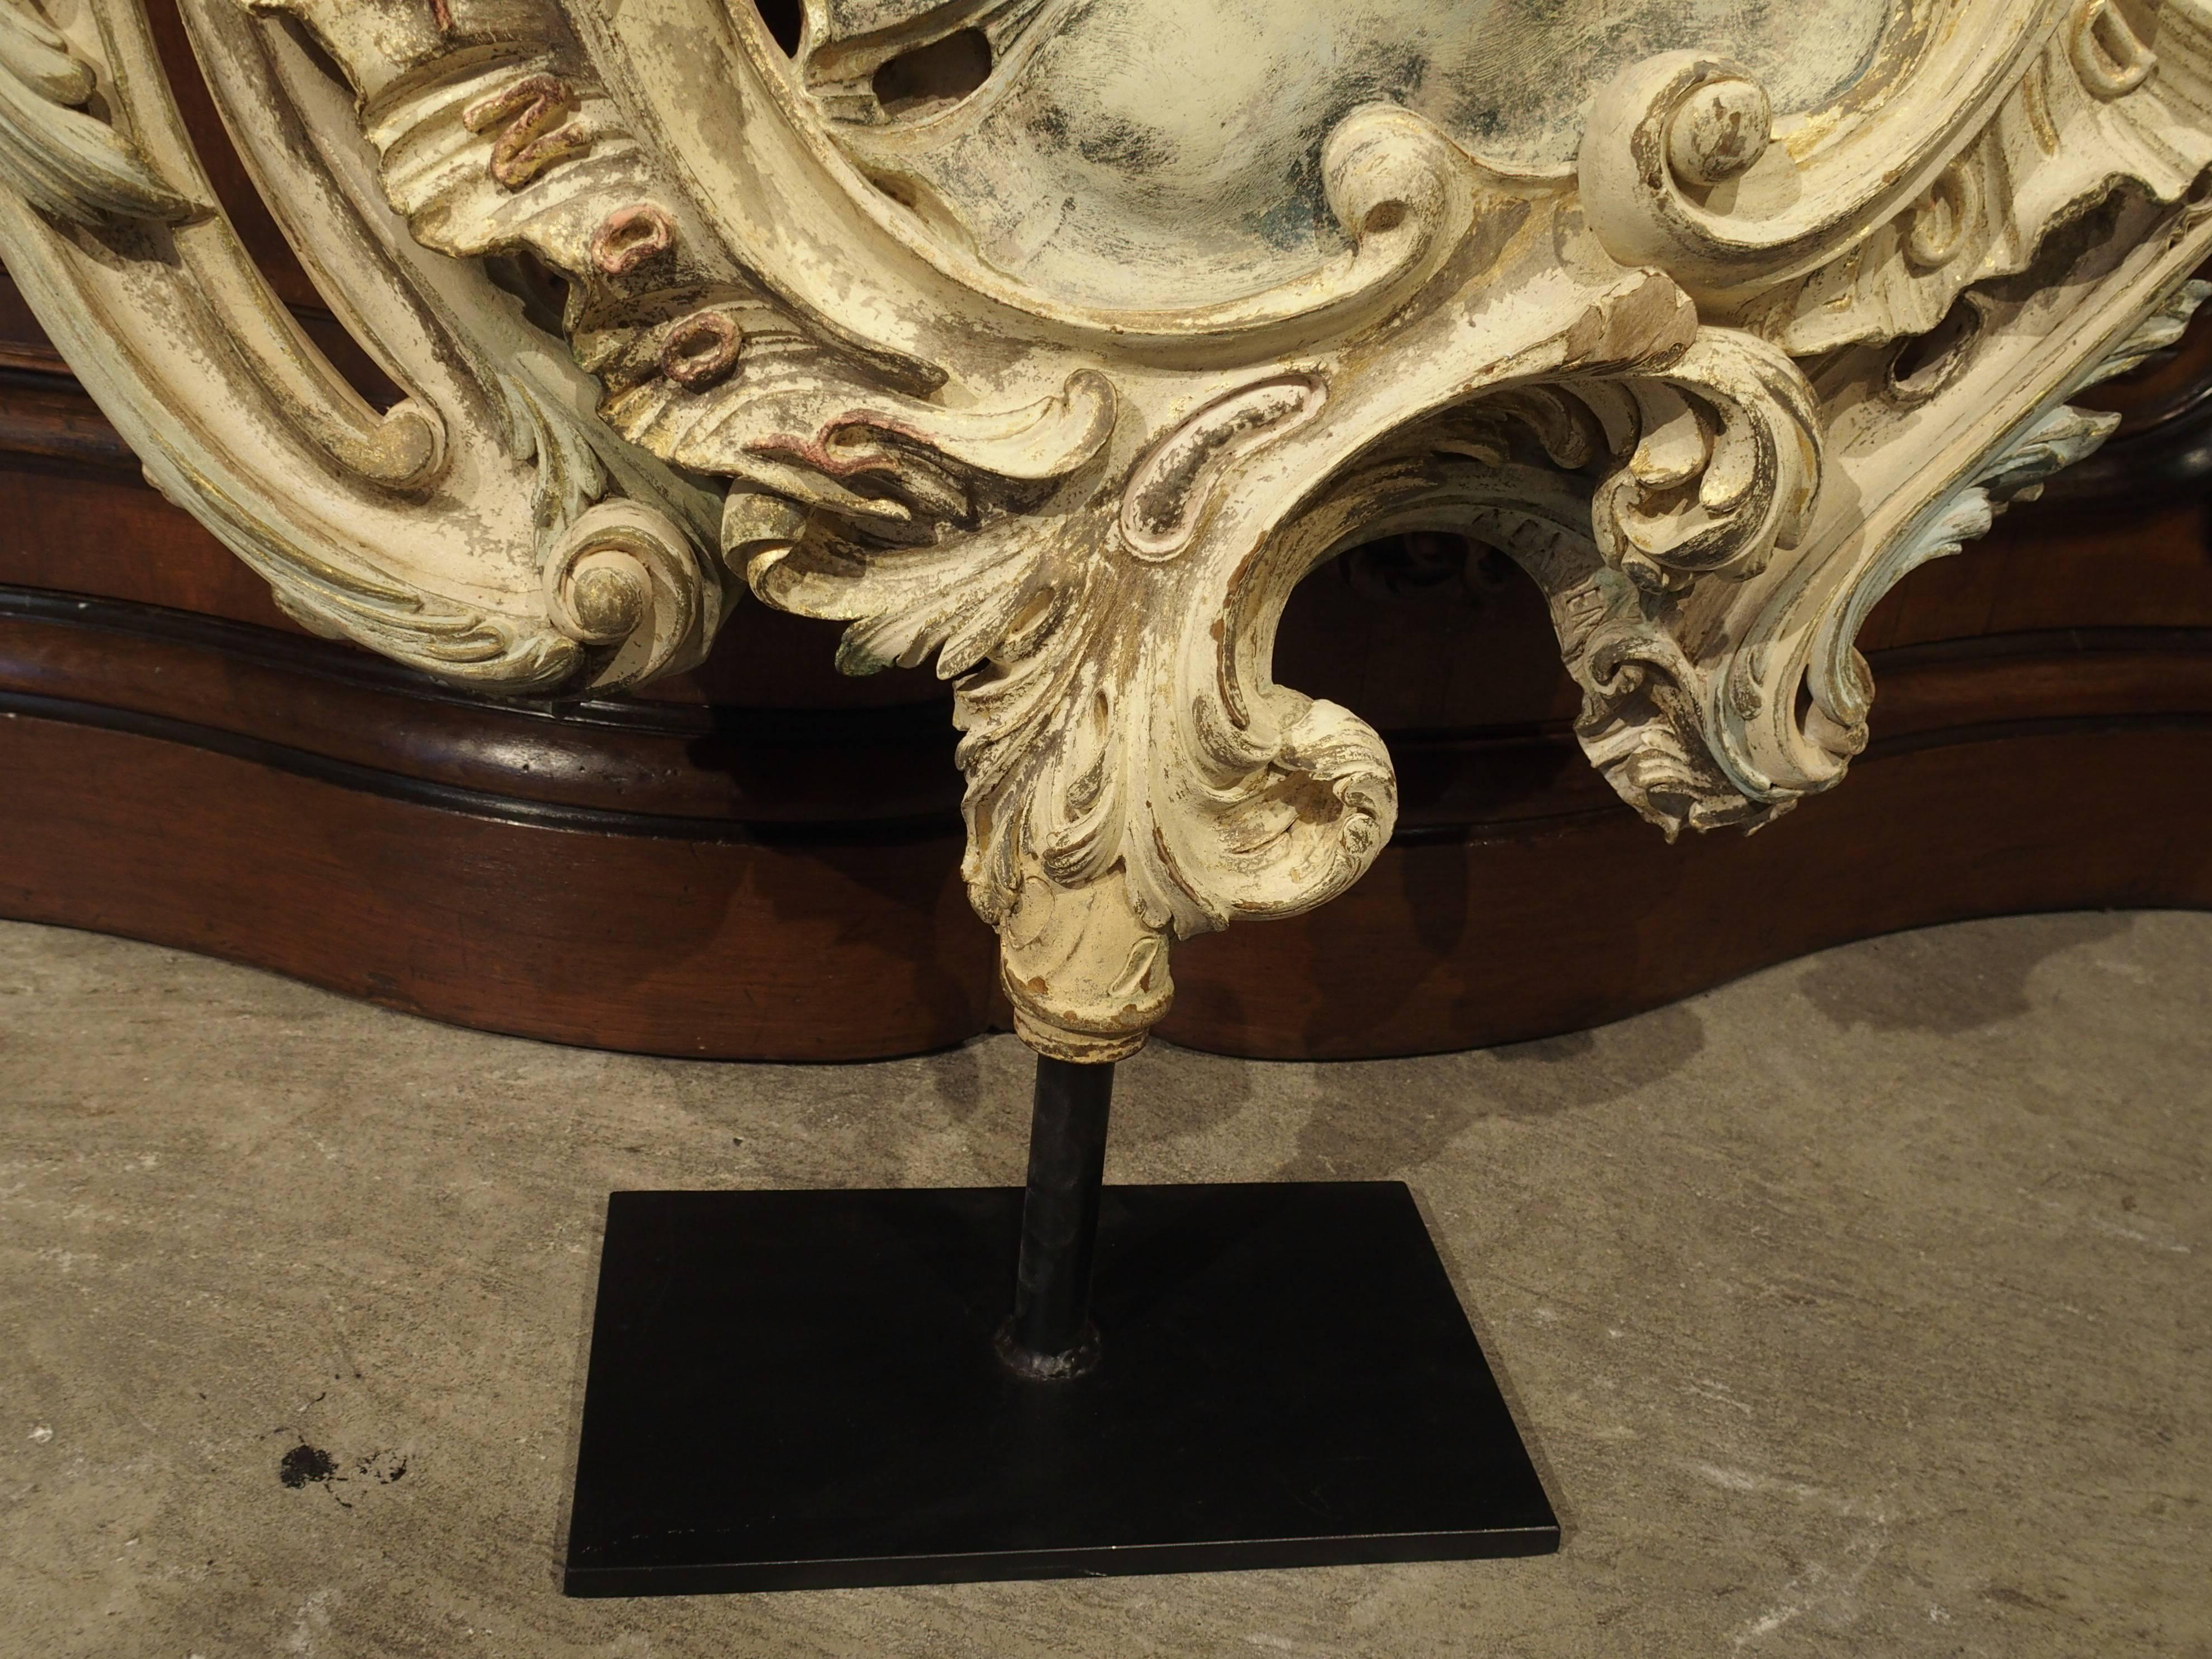 19th Century Carved and Polychromed Rococo Cartouche on Stand, Flanders, 1857